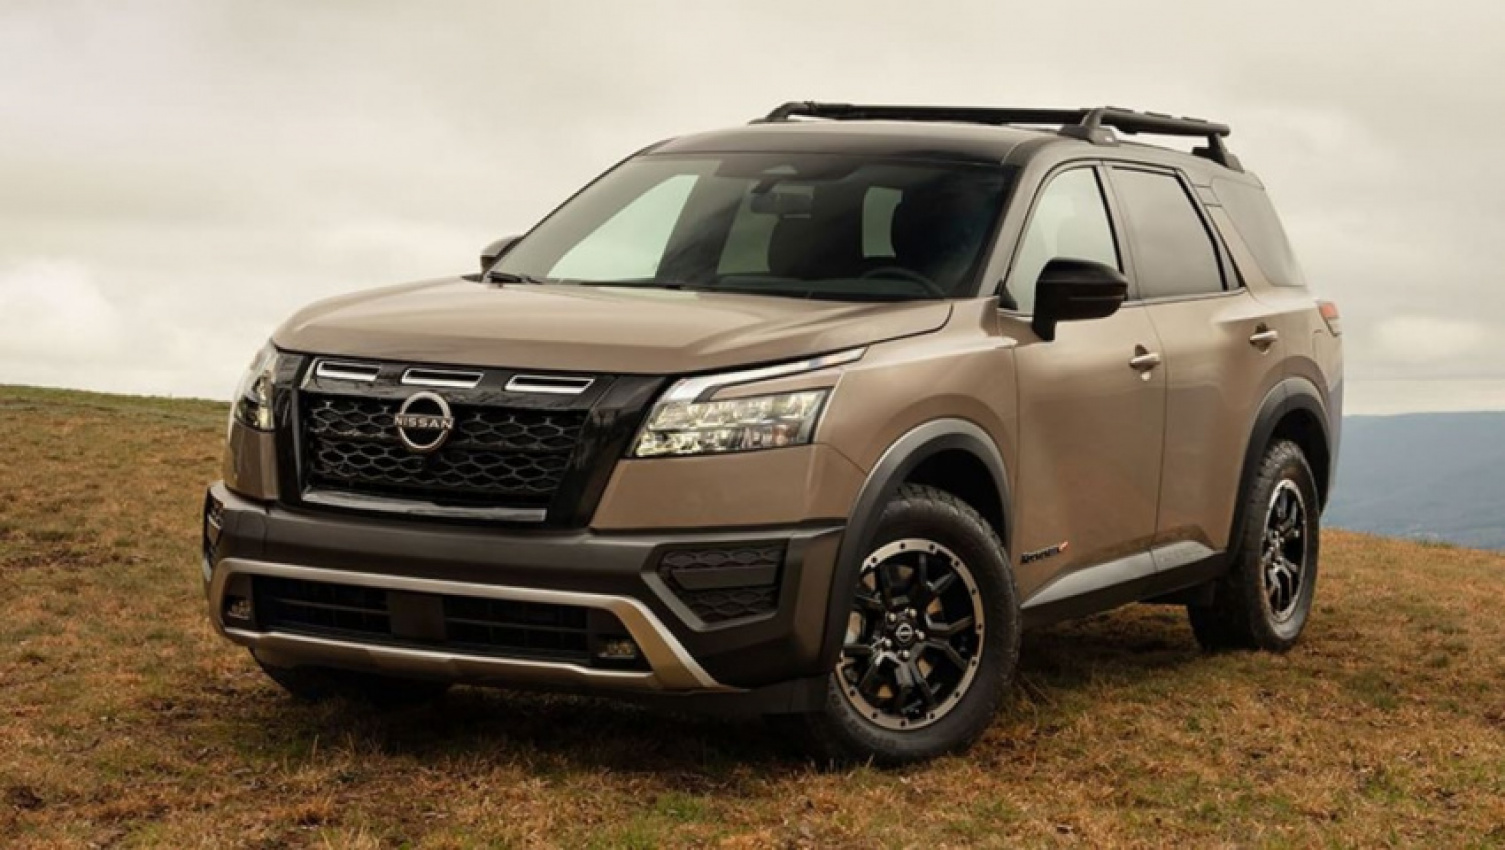 autos, cars, nissan, toyota, industry news, nissan news, nissan pathfinder, nissan pathfinder 2022, nissan suv range, off-road, showroom news, a genuine toyota prado rival? 2022 nissan pathfinder scores rock creek upgrades to transform into more off-road capable large suv